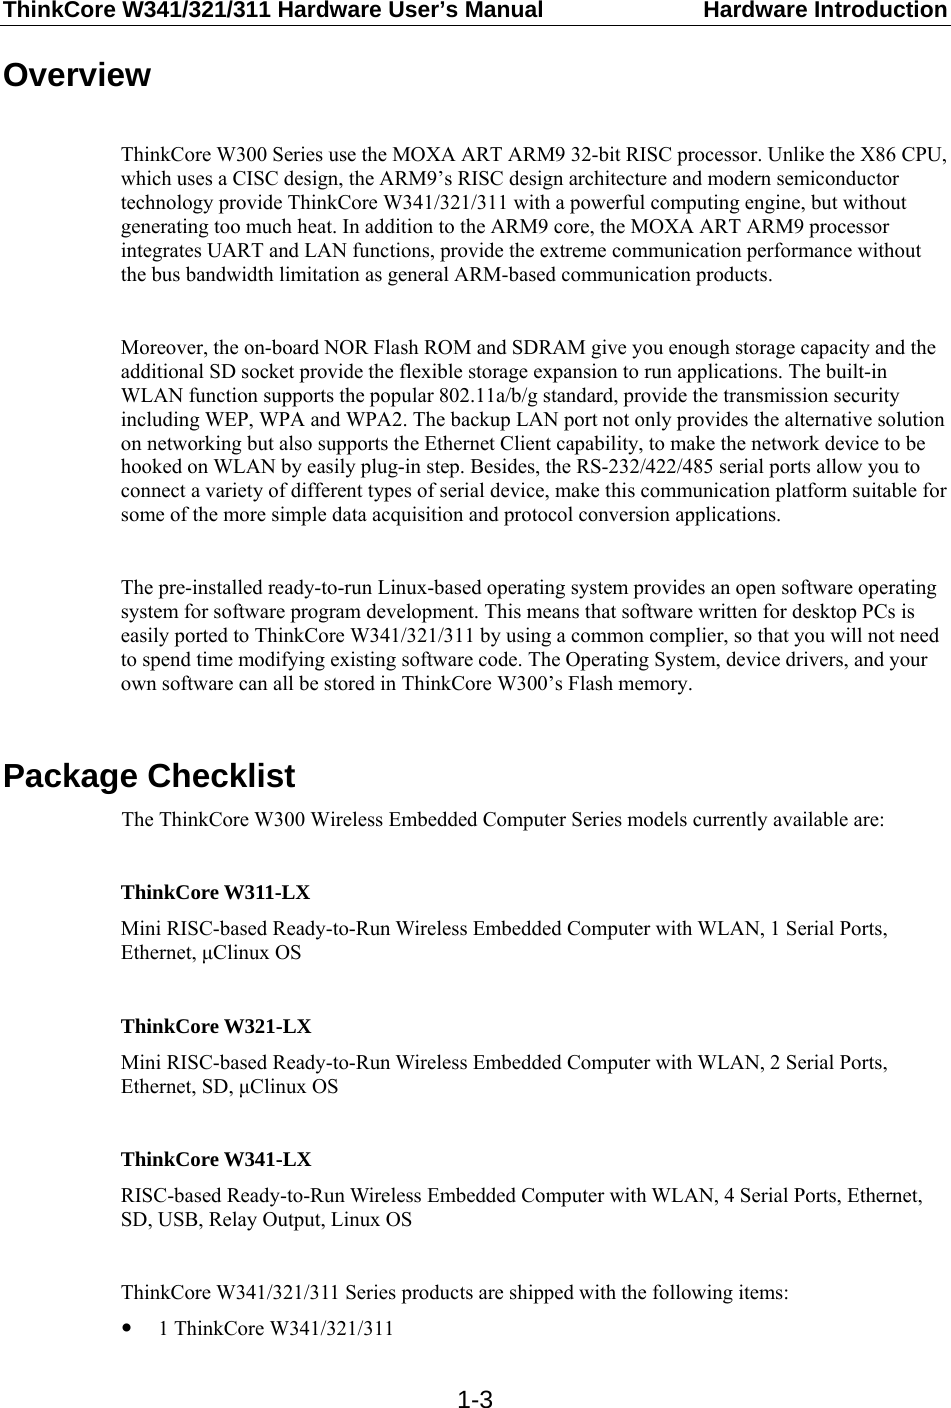 ThinkCore W341/321/311 Hardware User’s Manual  Hardware Introduction  1-3Overview  ThinkCore W300 Series use the MOXA ART ARM9 32-bit RISC processor. Unlike the X86 CPU, which uses a CISC design, the ARM9’s RISC design architecture and modern semiconductor technology provide ThinkCore W341/321/311 with a powerful computing engine, but without generating too much heat. In addition to the ARM9 core, the MOXA ART ARM9 processor integrates UART and LAN functions, provide the extreme communication performance without the bus bandwidth limitation as general ARM-based communication products.  Moreover, the on-board NOR Flash ROM and SDRAM give you enough storage capacity and the additional SD socket provide the flexible storage expansion to run applications. The built-in WLAN function supports the popular 802.11a/b/g standard, provide the transmission security including WEP, WPA and WPA2. The backup LAN port not only provides the alternative solution on networking but also supports the Ethernet Client capability, to make the network device to be hooked on WLAN by easily plug-in step. Besides, the RS-232/422/485 serial ports allow you to connect a variety of different types of serial device, make this communication platform suitable for some of the more simple data acquisition and protocol conversion applications.  The pre-installed ready-to-run Linux-based operating system provides an open software operating system for software program development. This means that software written for desktop PCs is easily ported to ThinkCore W341/321/311 by using a common complier, so that you will not need to spend time modifying existing software code. The Operating System, device drivers, and your own software can all be stored in ThinkCore W300’s Flash memory.  Package Checklist The ThinkCore W300 Wireless Embedded Computer Series models currently available are:  ThinkCore W311-LX Mini RISC-based Ready-to-Run Wireless Embedded Computer with WLAN, 1 Serial Ports, Ethernet, μClinux OS  ThinkCore W321-LX Mini RISC-based Ready-to-Run Wireless Embedded Computer with WLAN, 2 Serial Ports, Ethernet, SD, μClinux OS  ThinkCore W341-LX RISC-based Ready-to-Run Wireless Embedded Computer with WLAN, 4 Serial Ports, Ethernet, SD, USB, Relay Output, Linux OS  ThinkCore W341/321/311 Series products are shipped with the following items: y 1 ThinkCore W341/321/311 